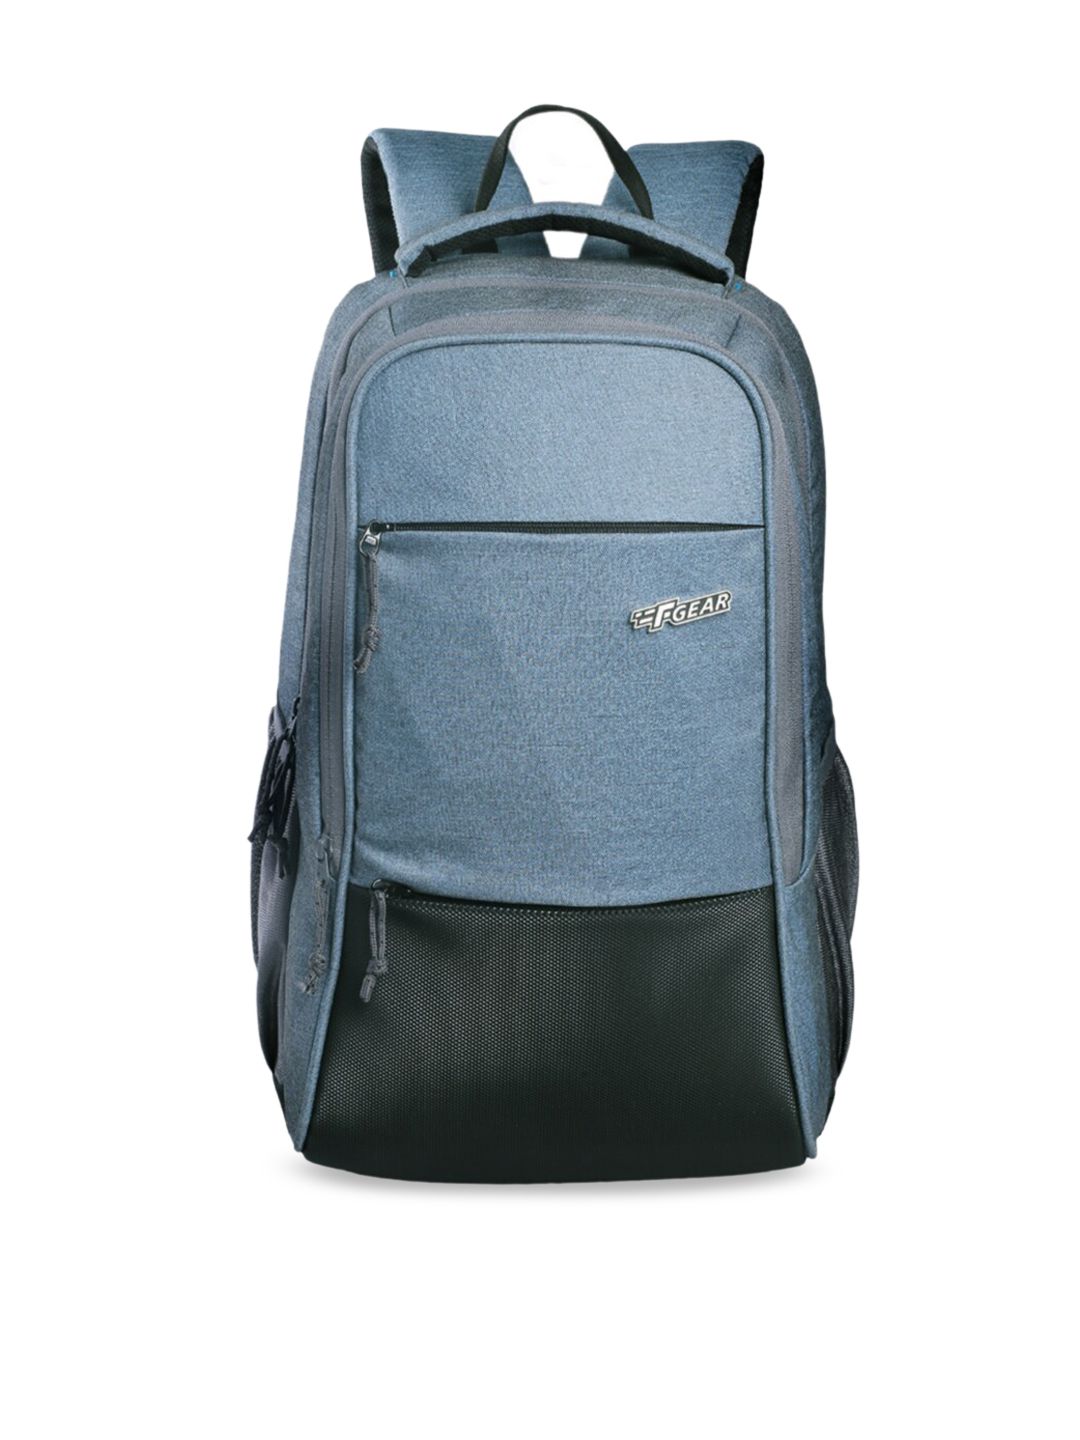 F Gear Unisex Blue & Black Colourblocked Backpack Price in India